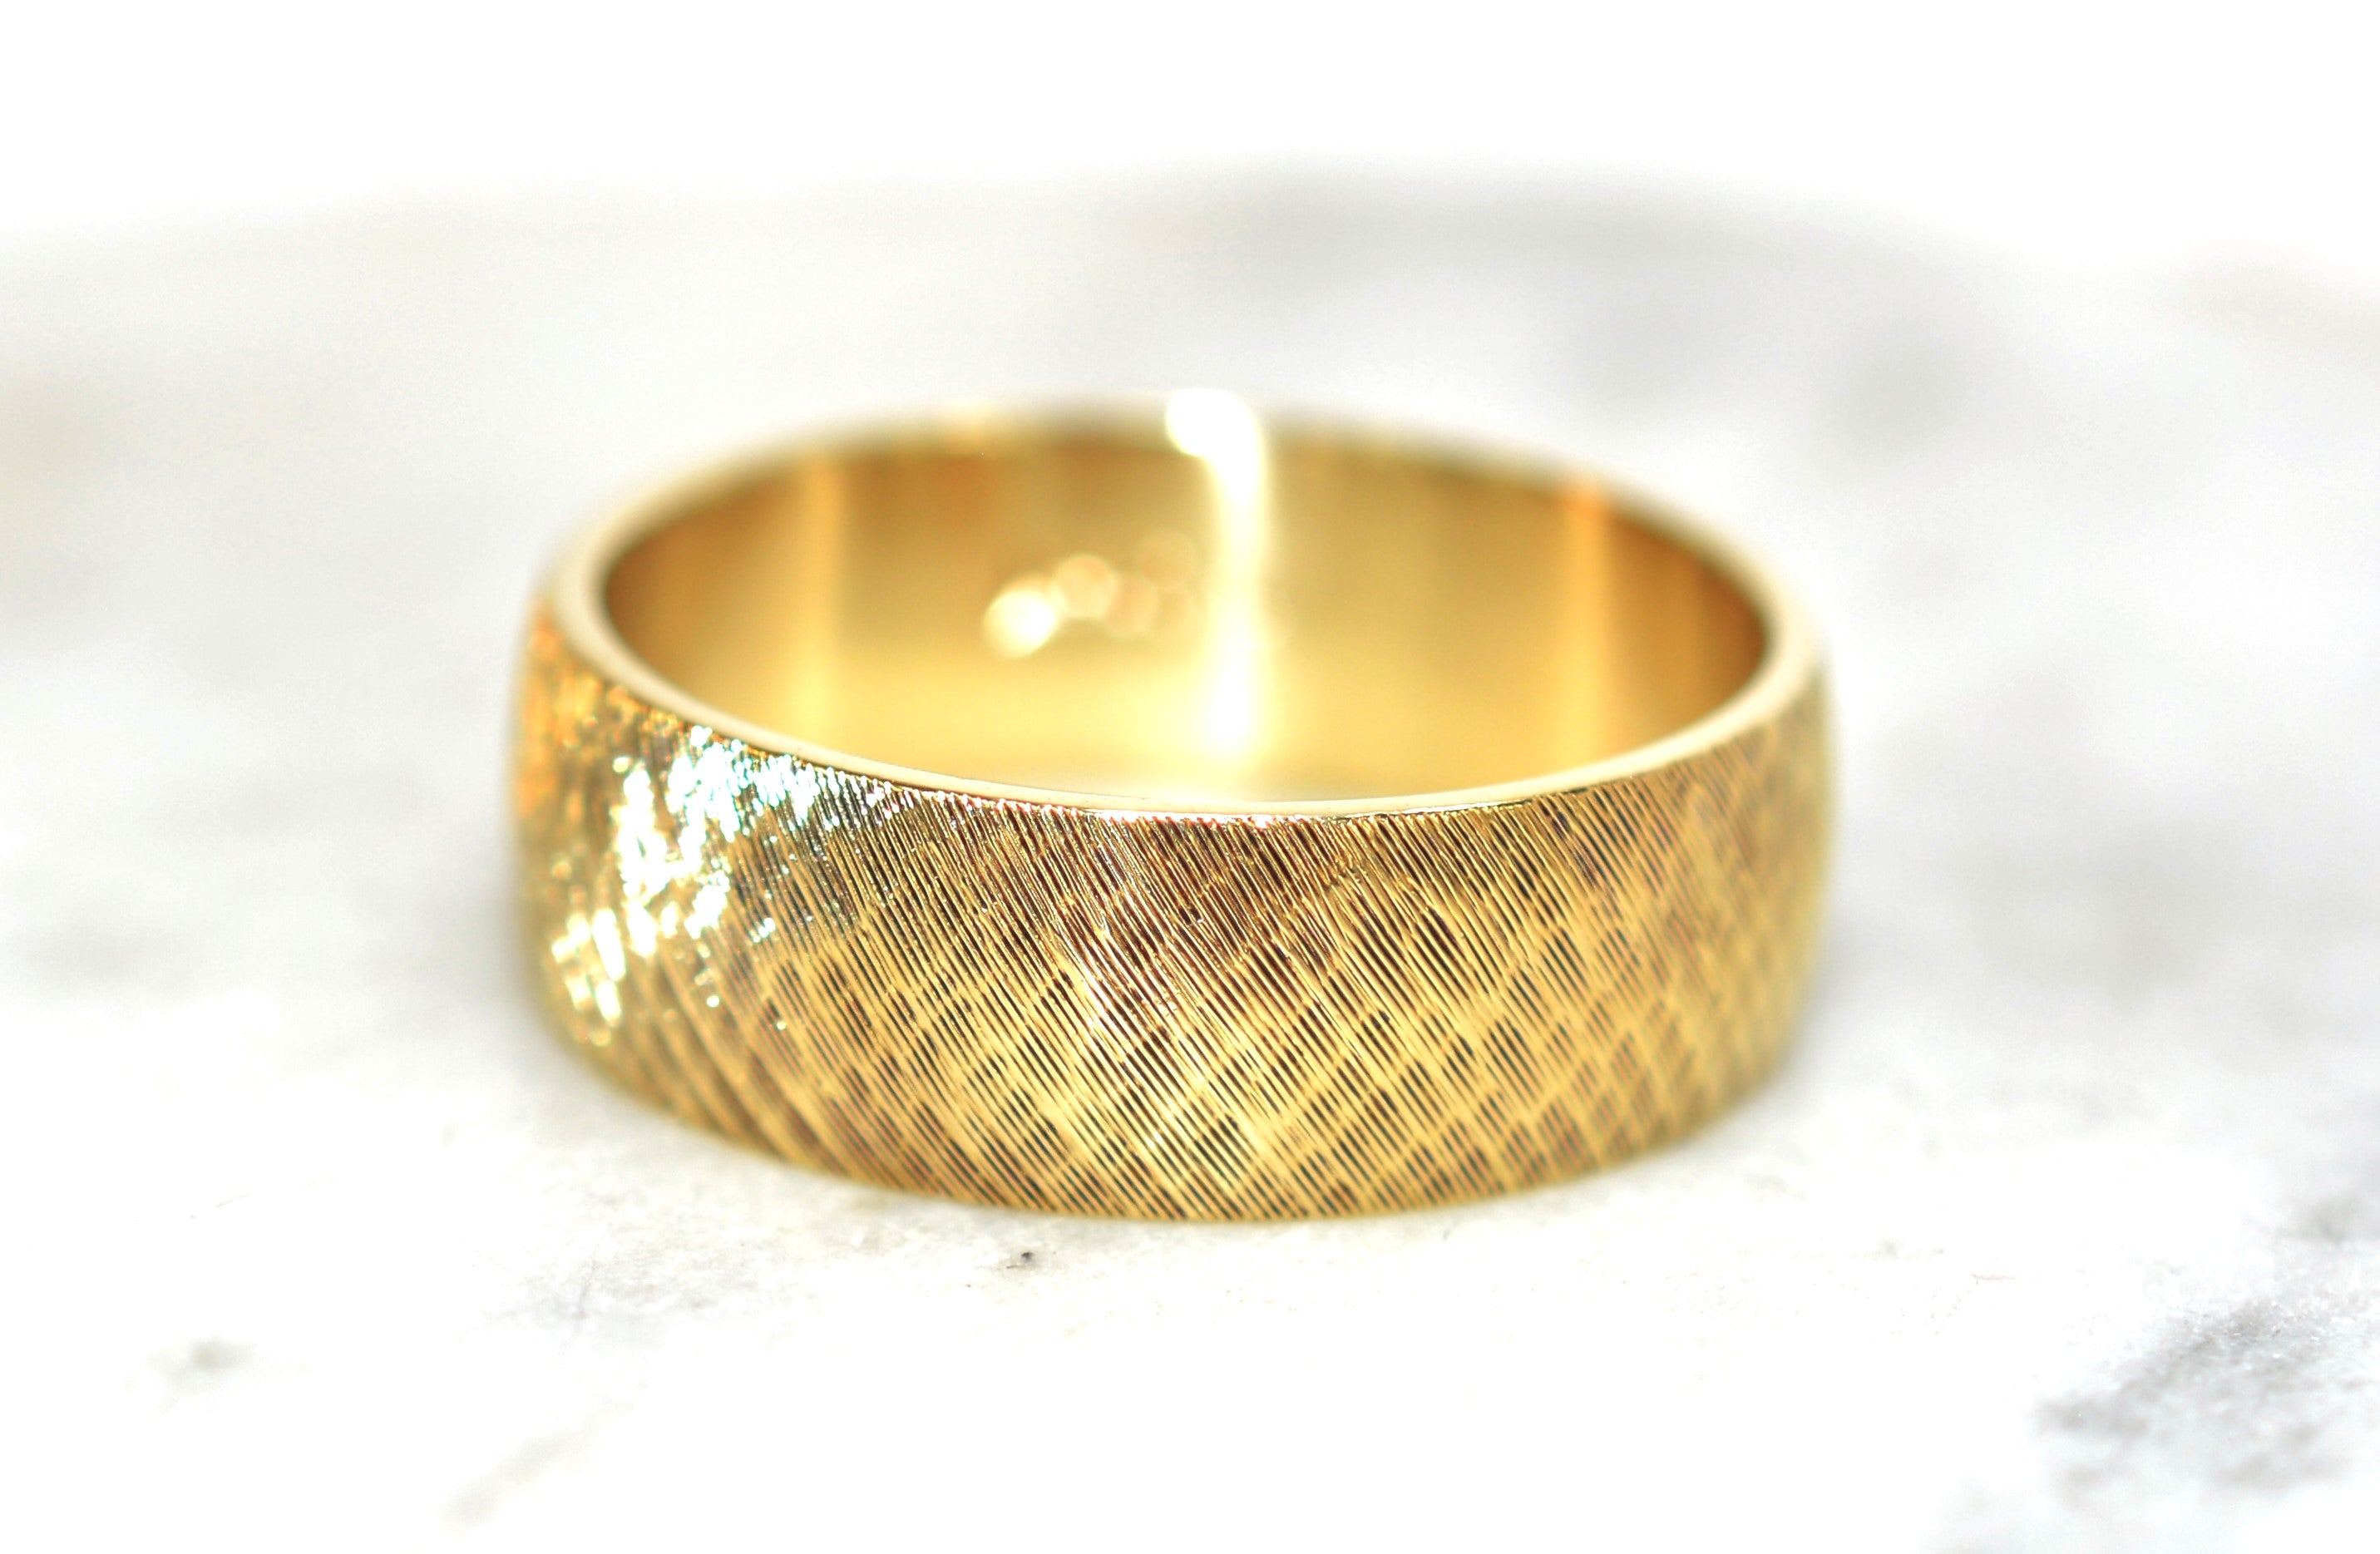 14K Solid Gold Ring Band Ring Wedding Band Wedding Ring Gold Band Bridal Jewelry Mens Ring Vintage Ring Estate Jewelry Matte Gold Band Fine